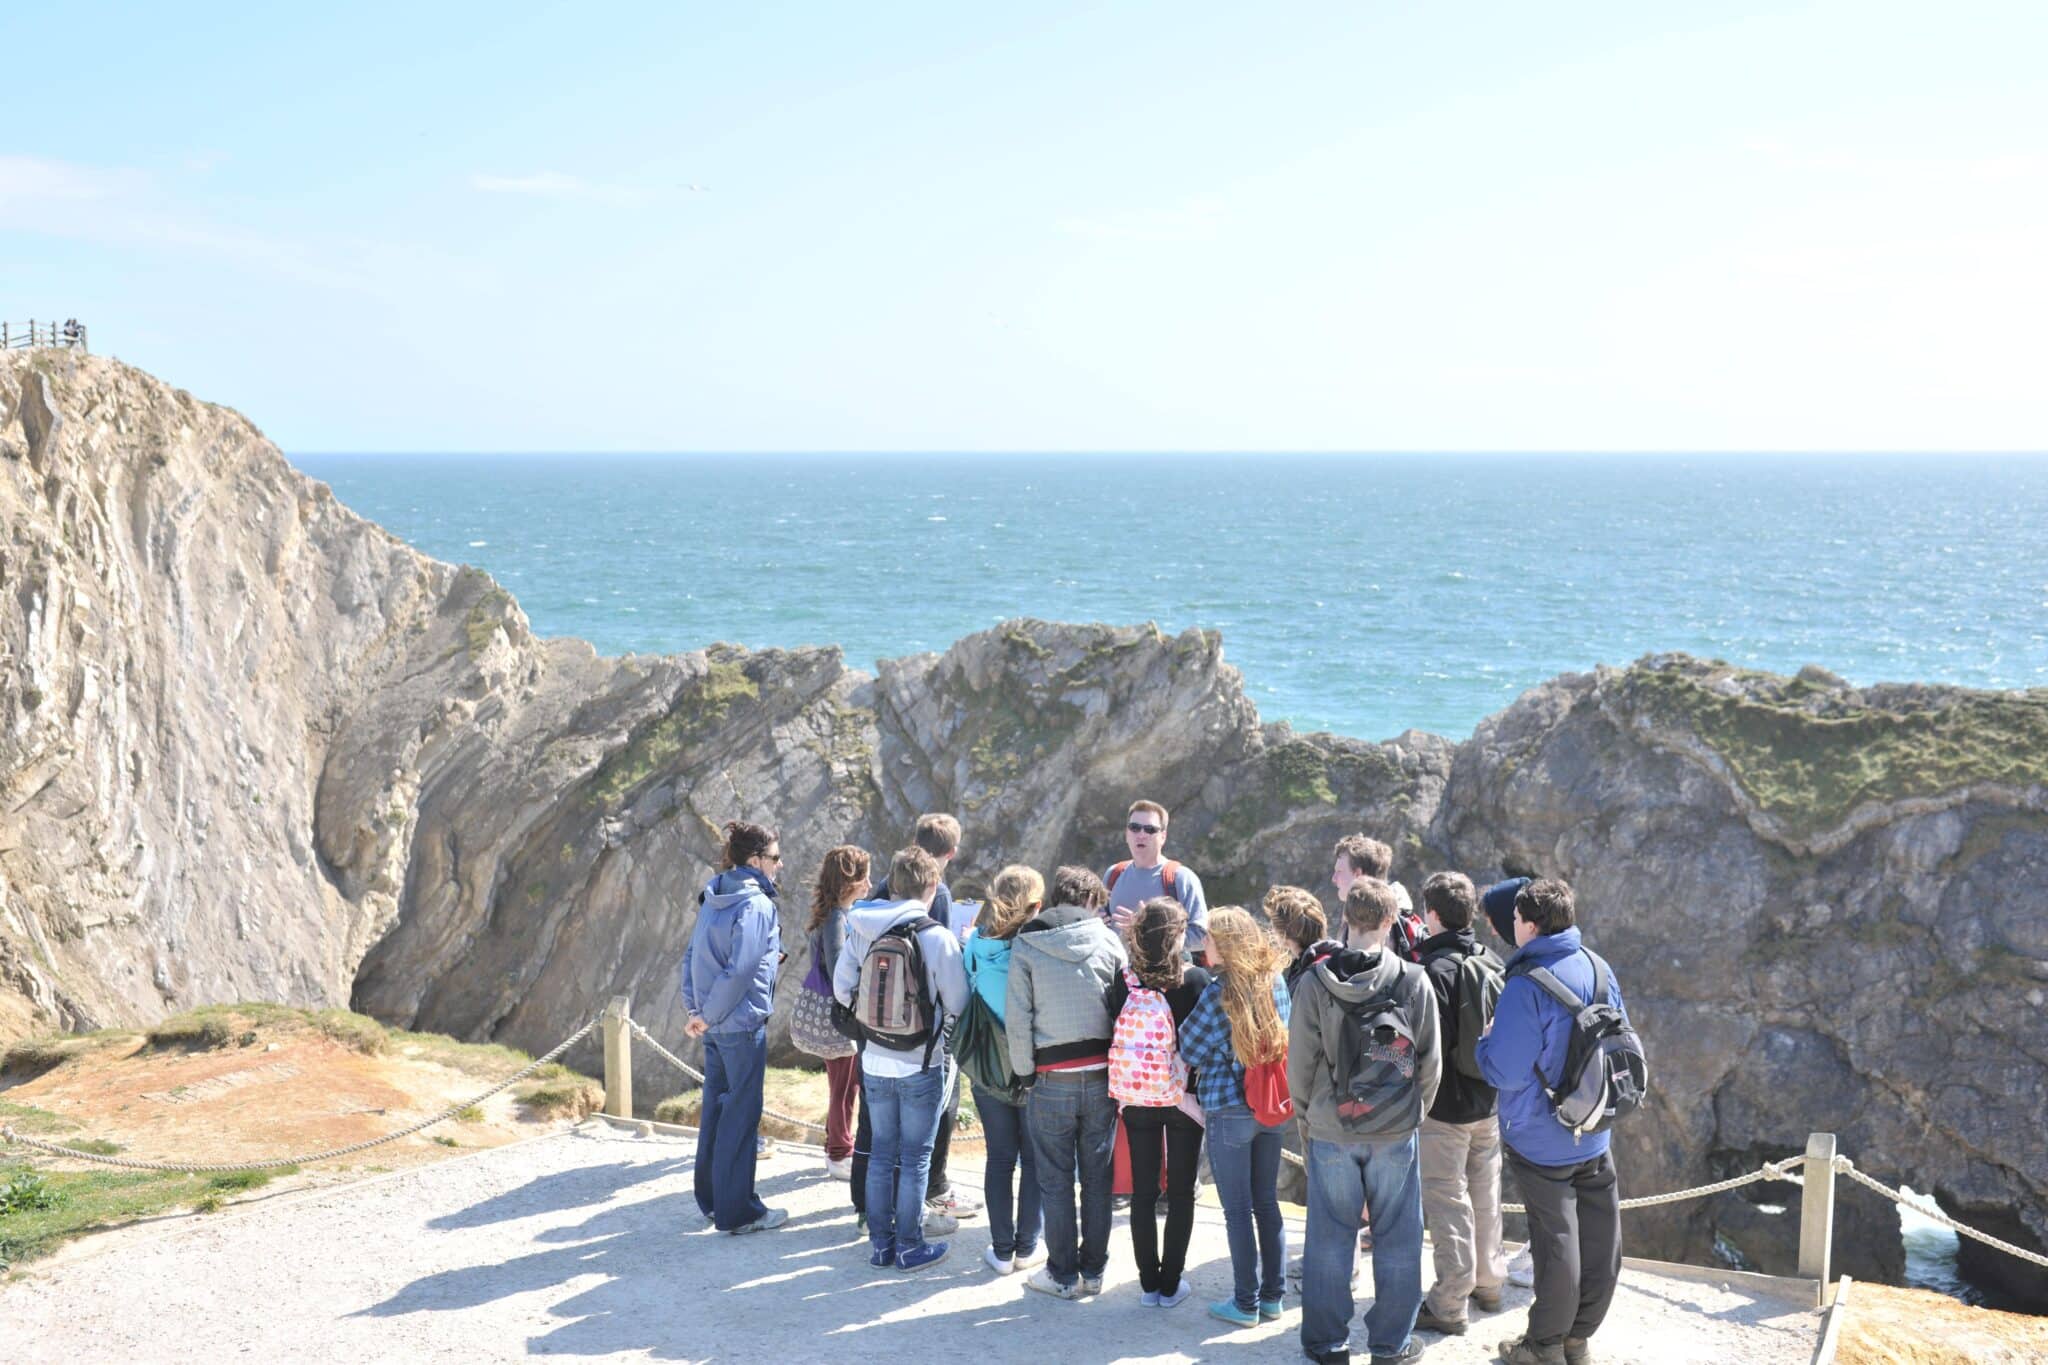 What Are the Benefits of Field Trips for Students?